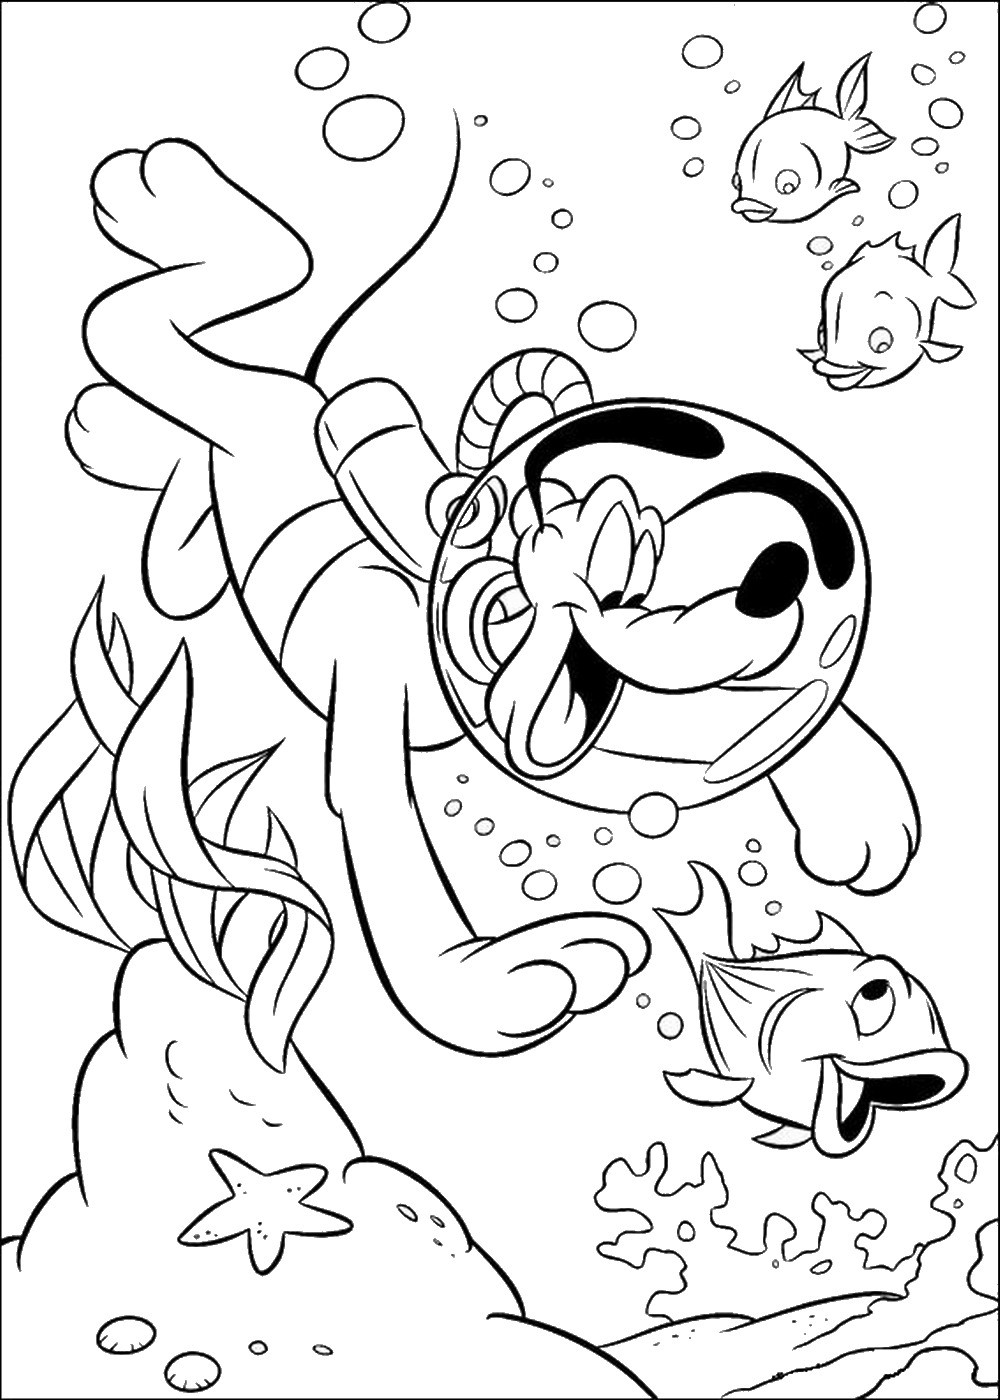 Coloring_Pages
 Pluto Coloring Pages